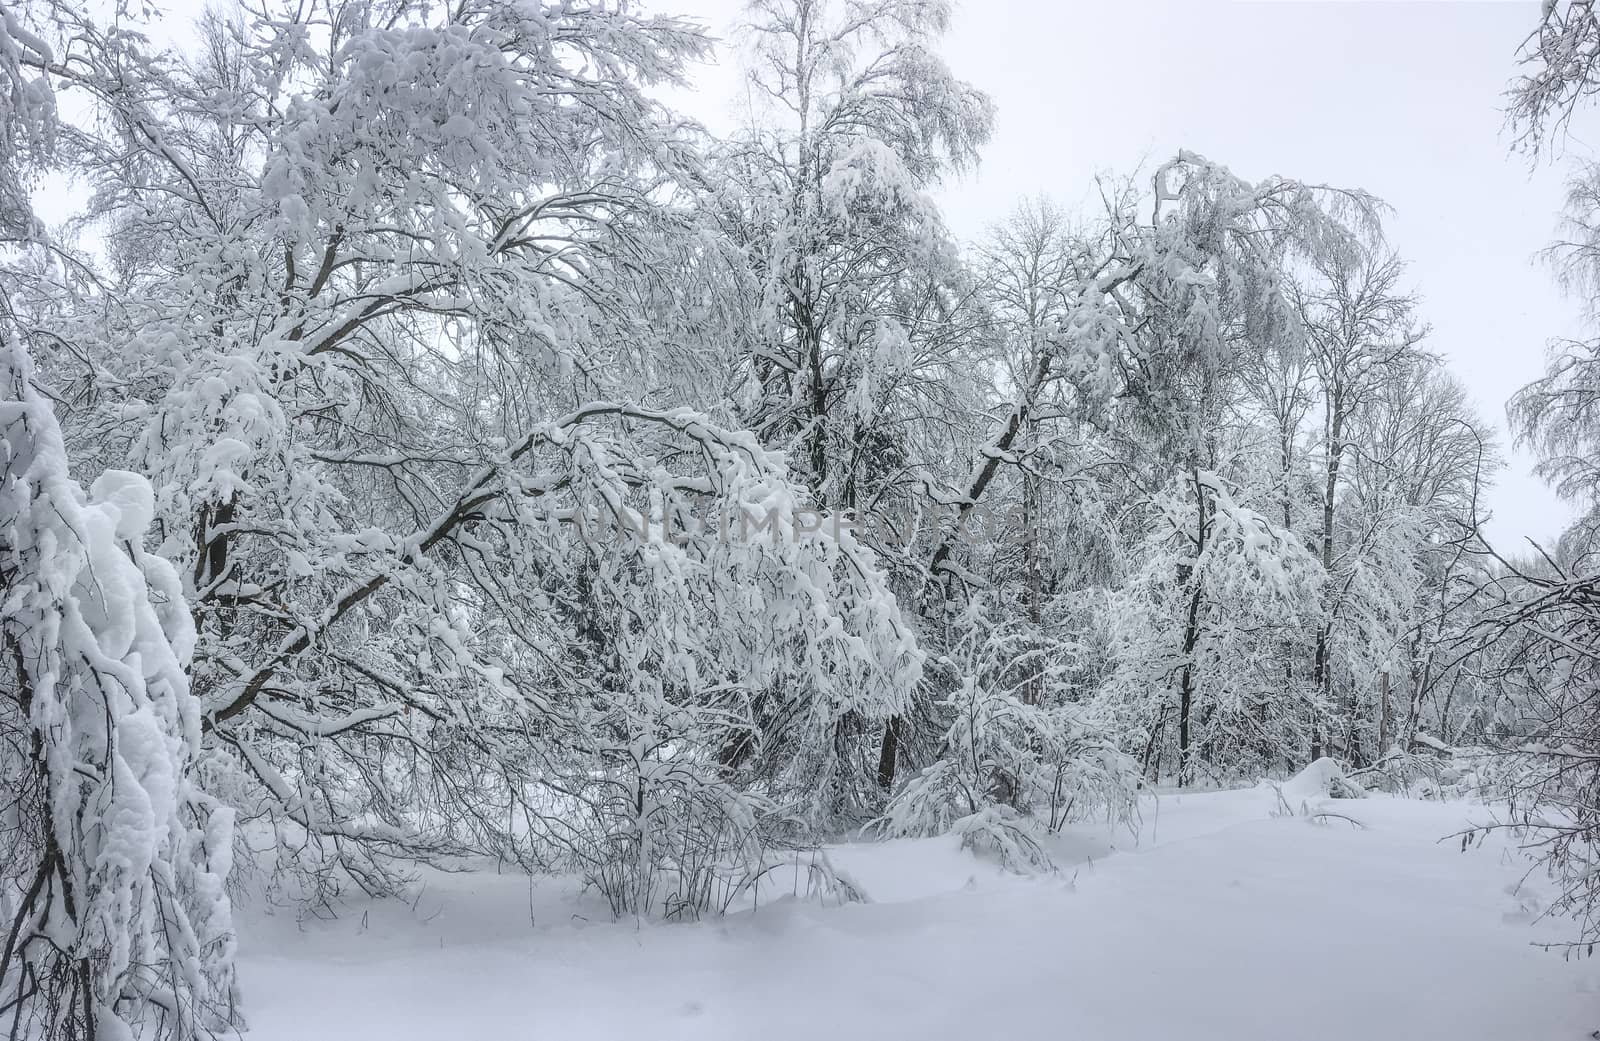 Panorama shot of a winter forest after heavy snowfal